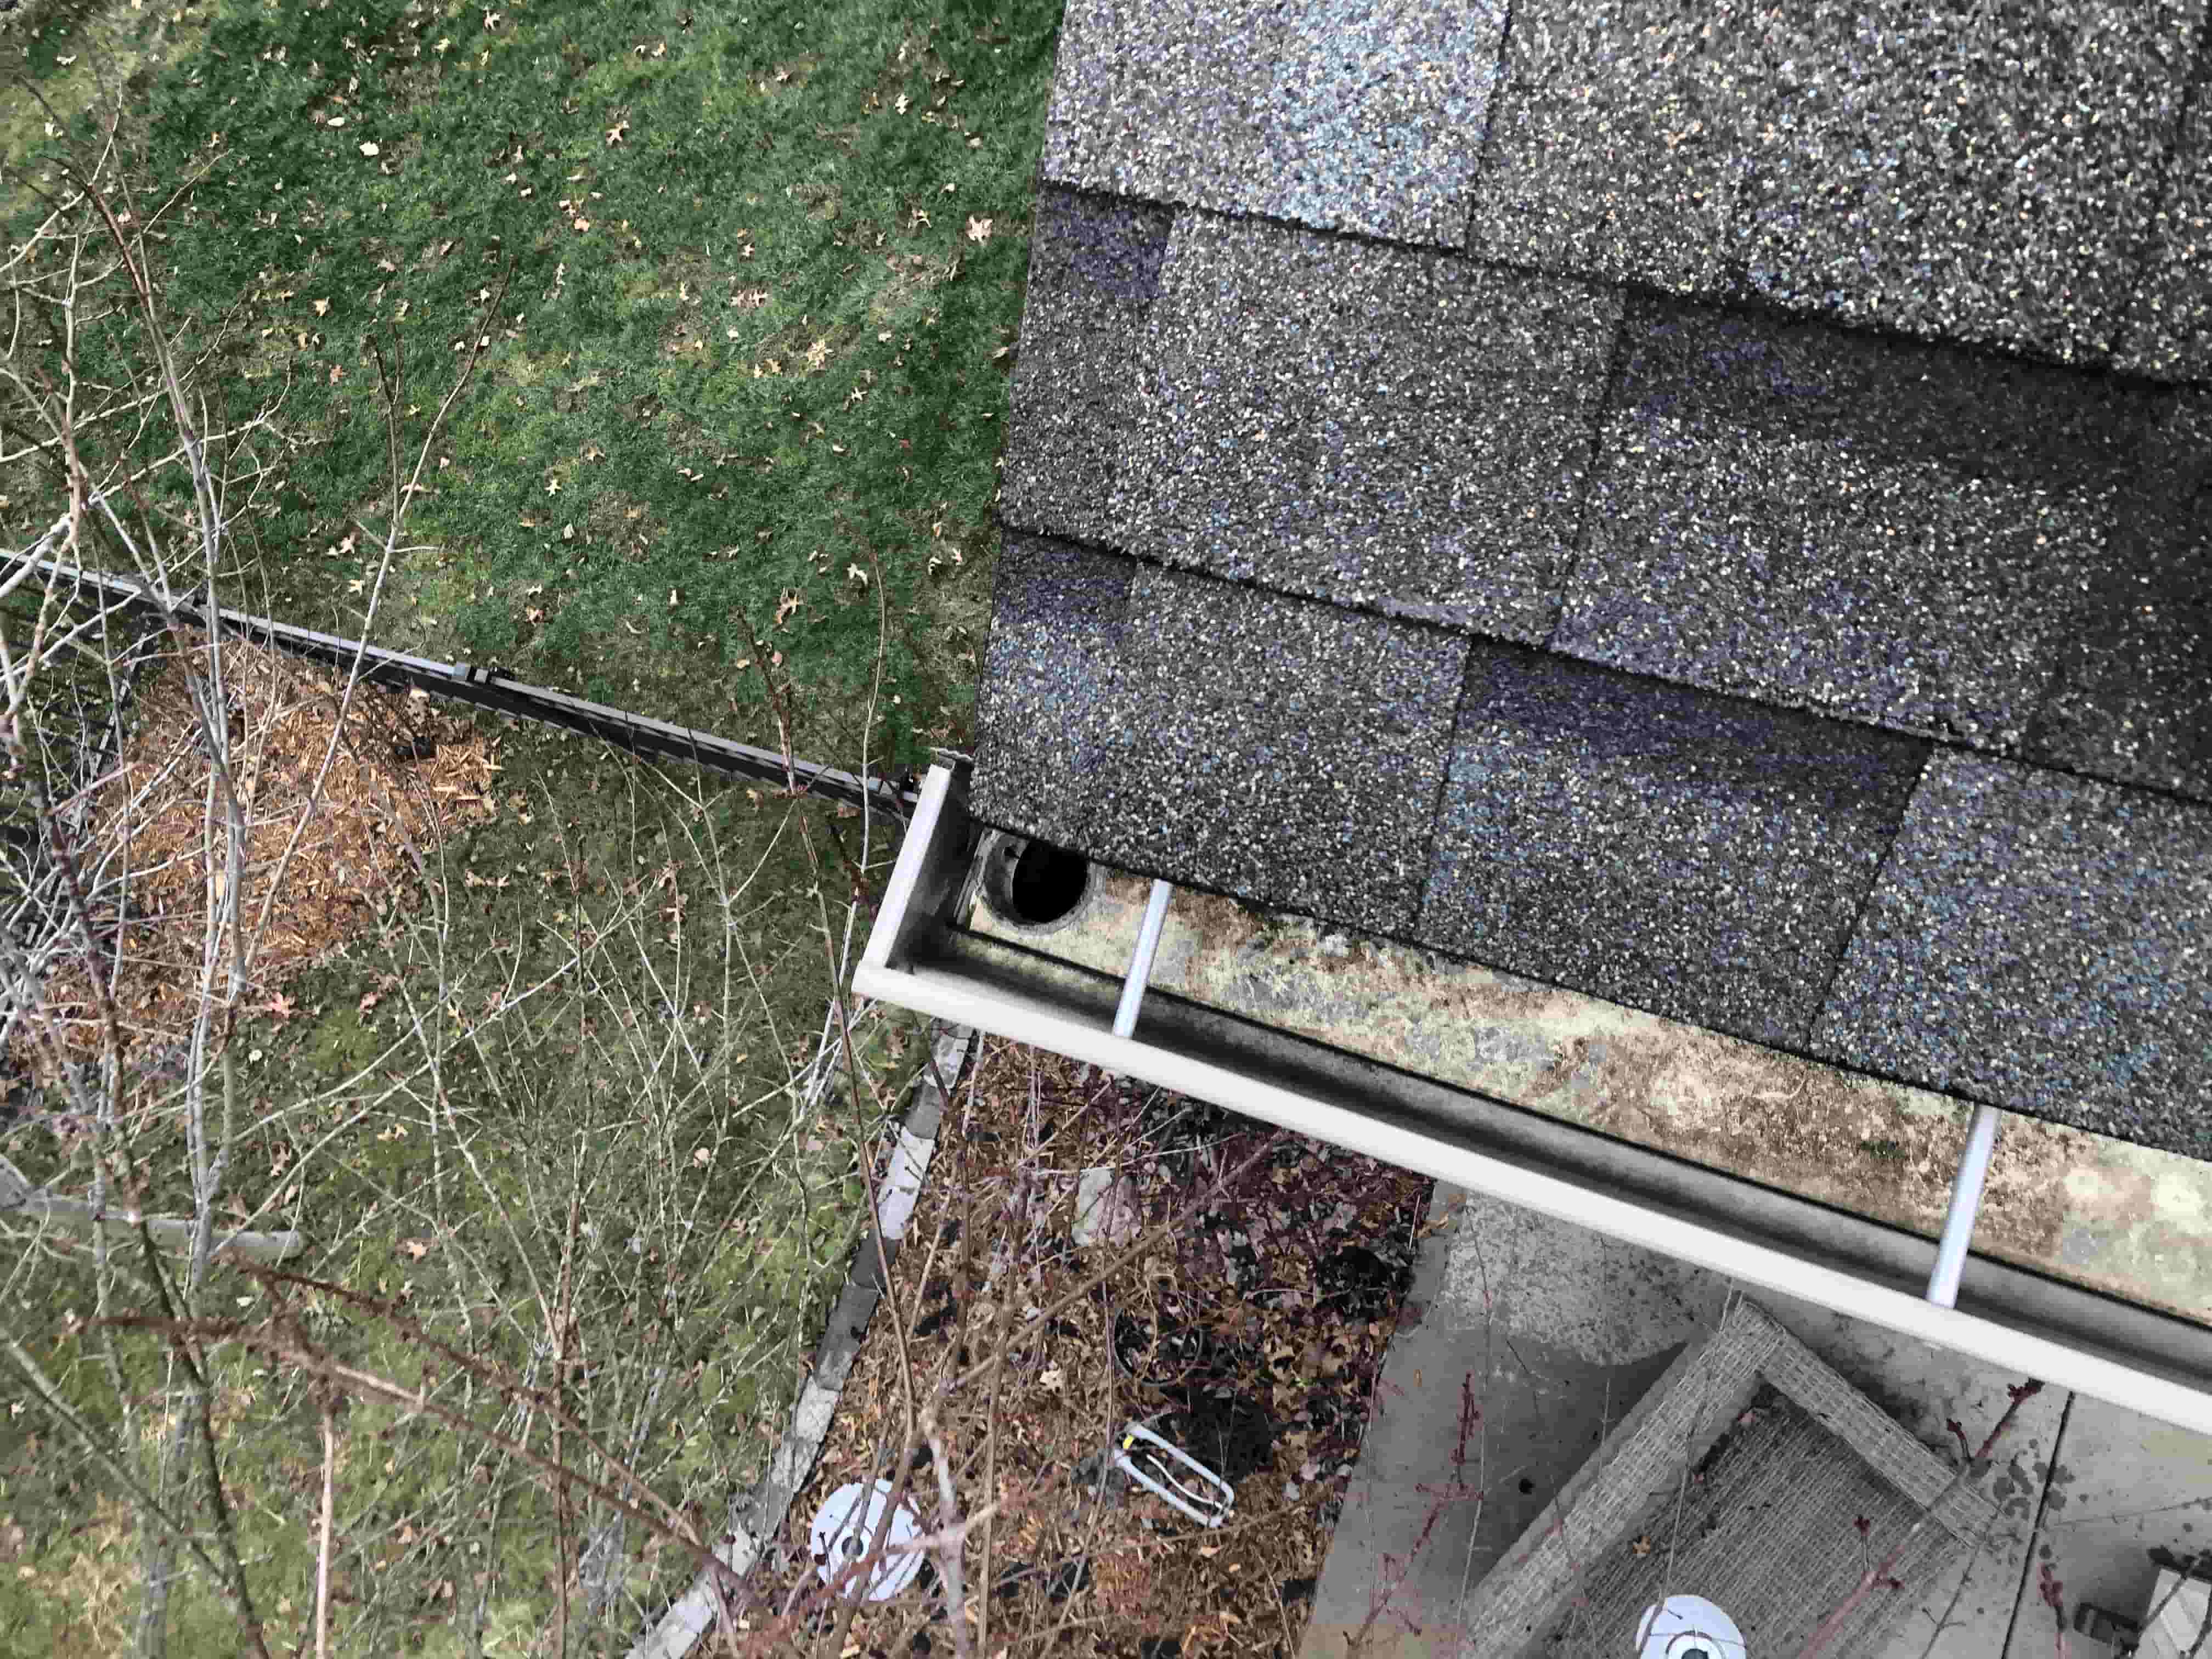 gutter cleaning tools from the ground